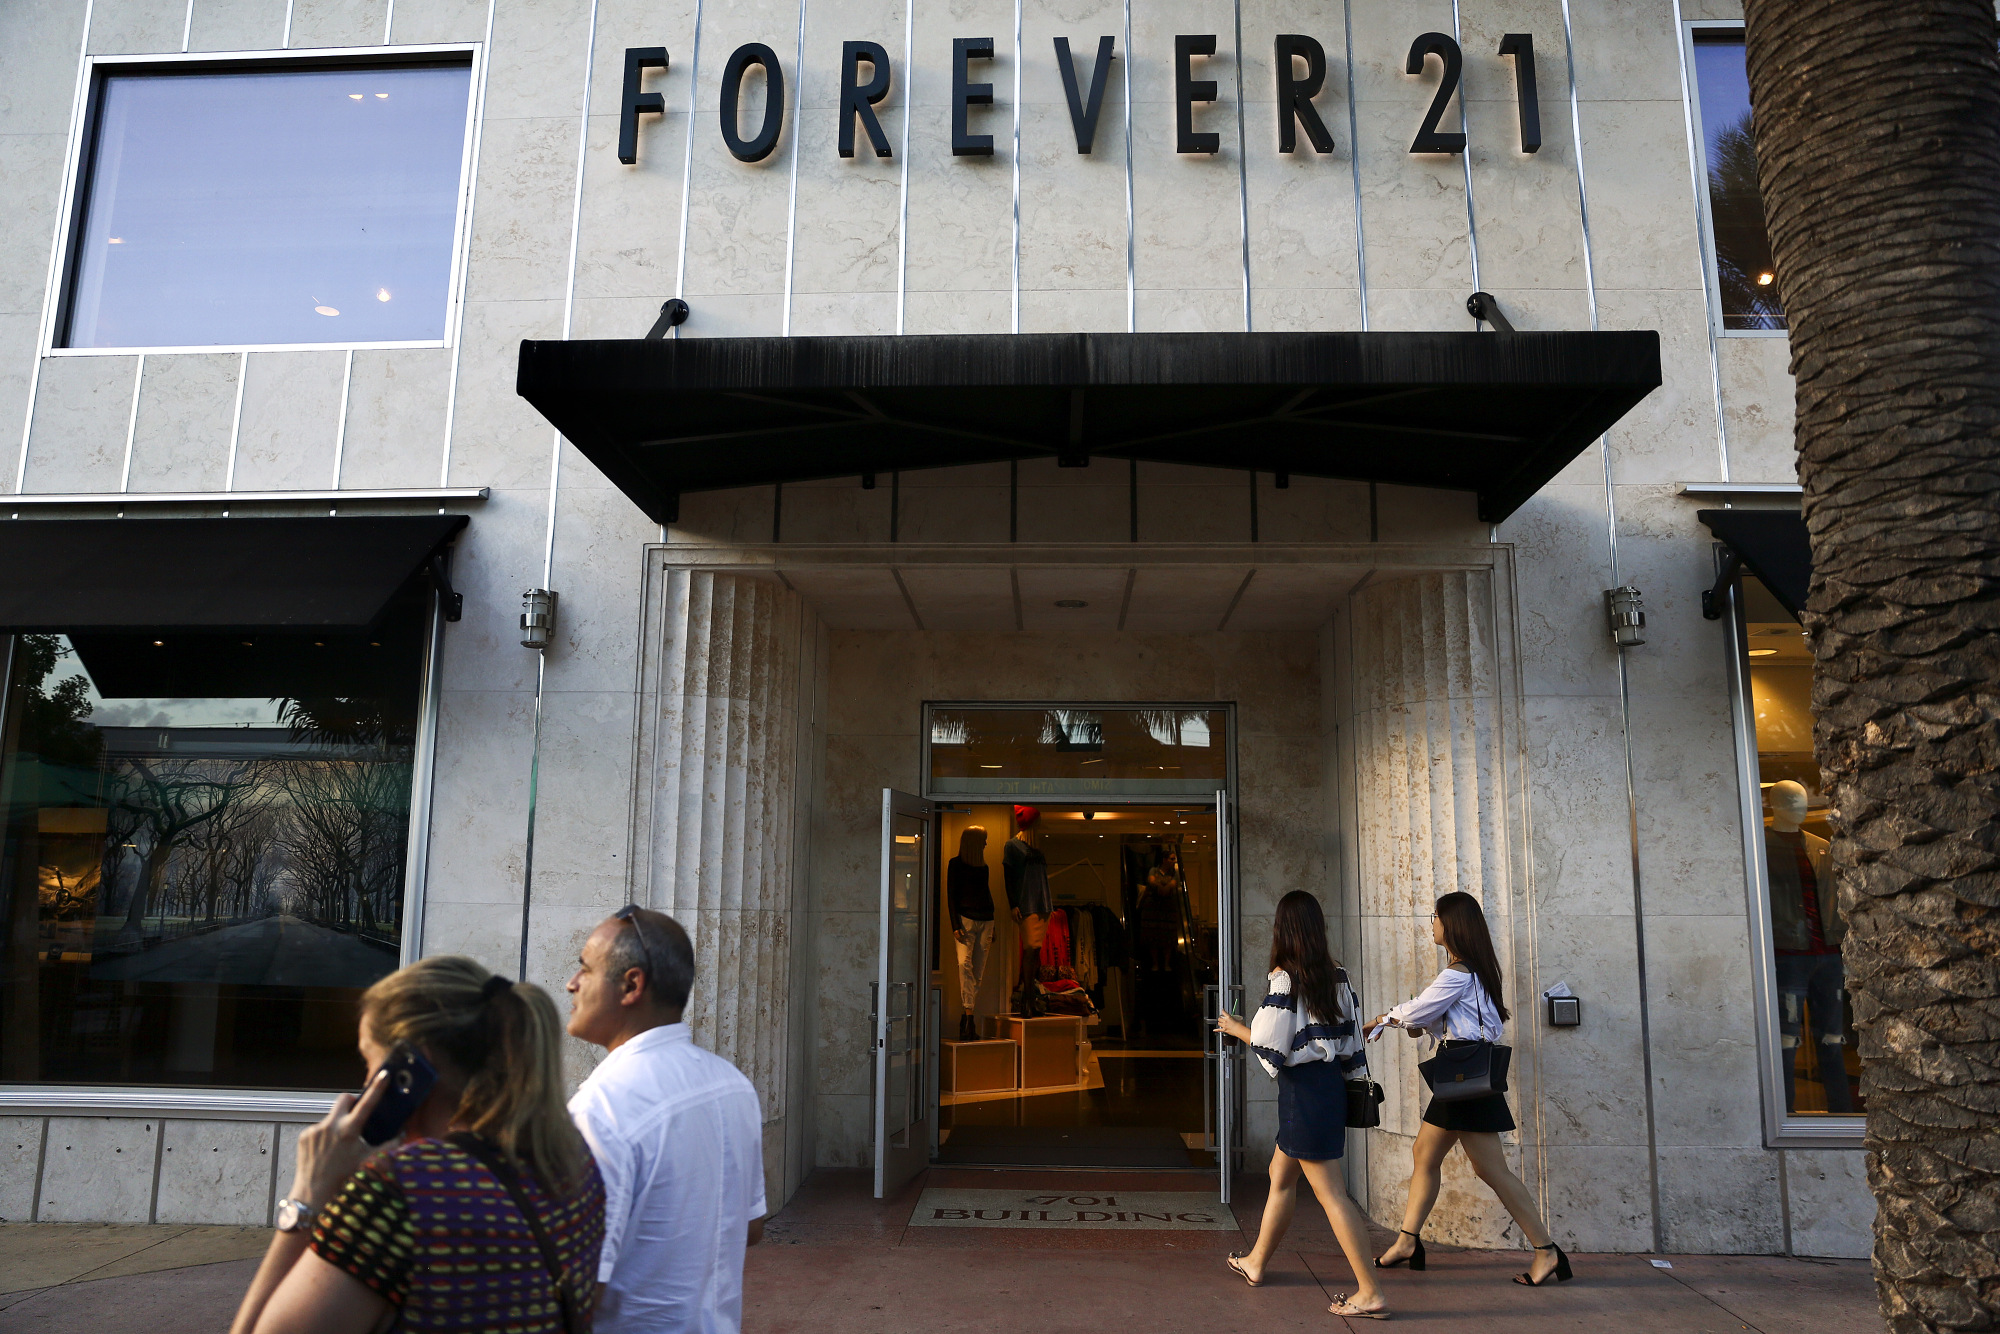 A Forever 21 store in Miami Beach